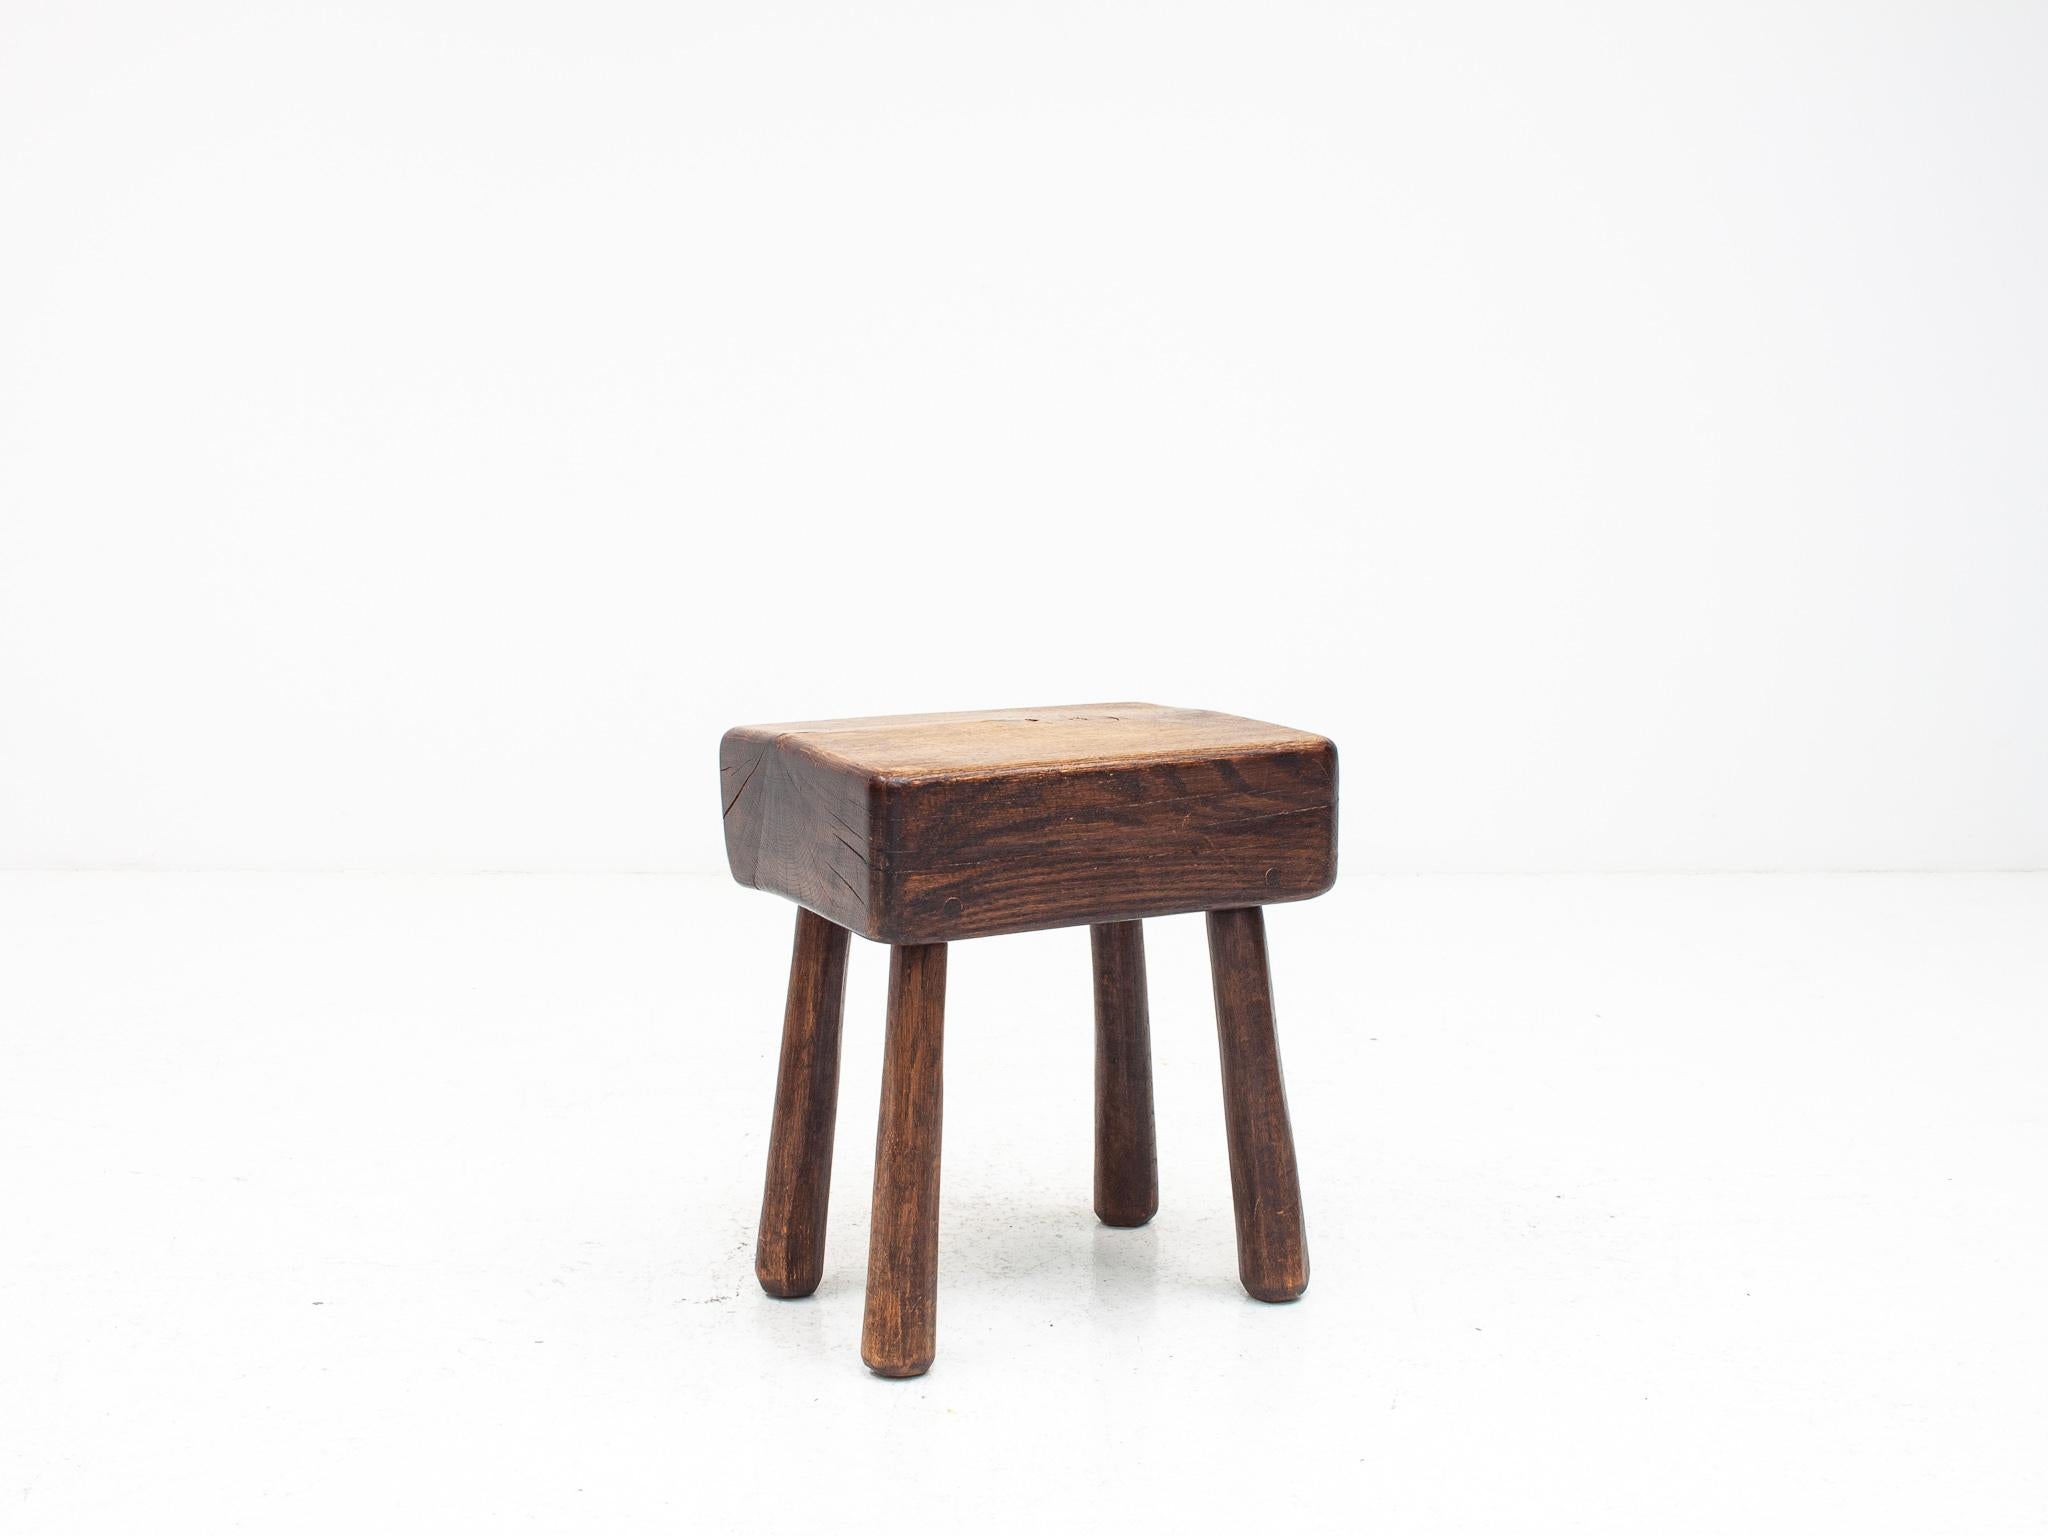  Rustic, Vintage Stool/Table, Belgium, 1900s For Sale 8